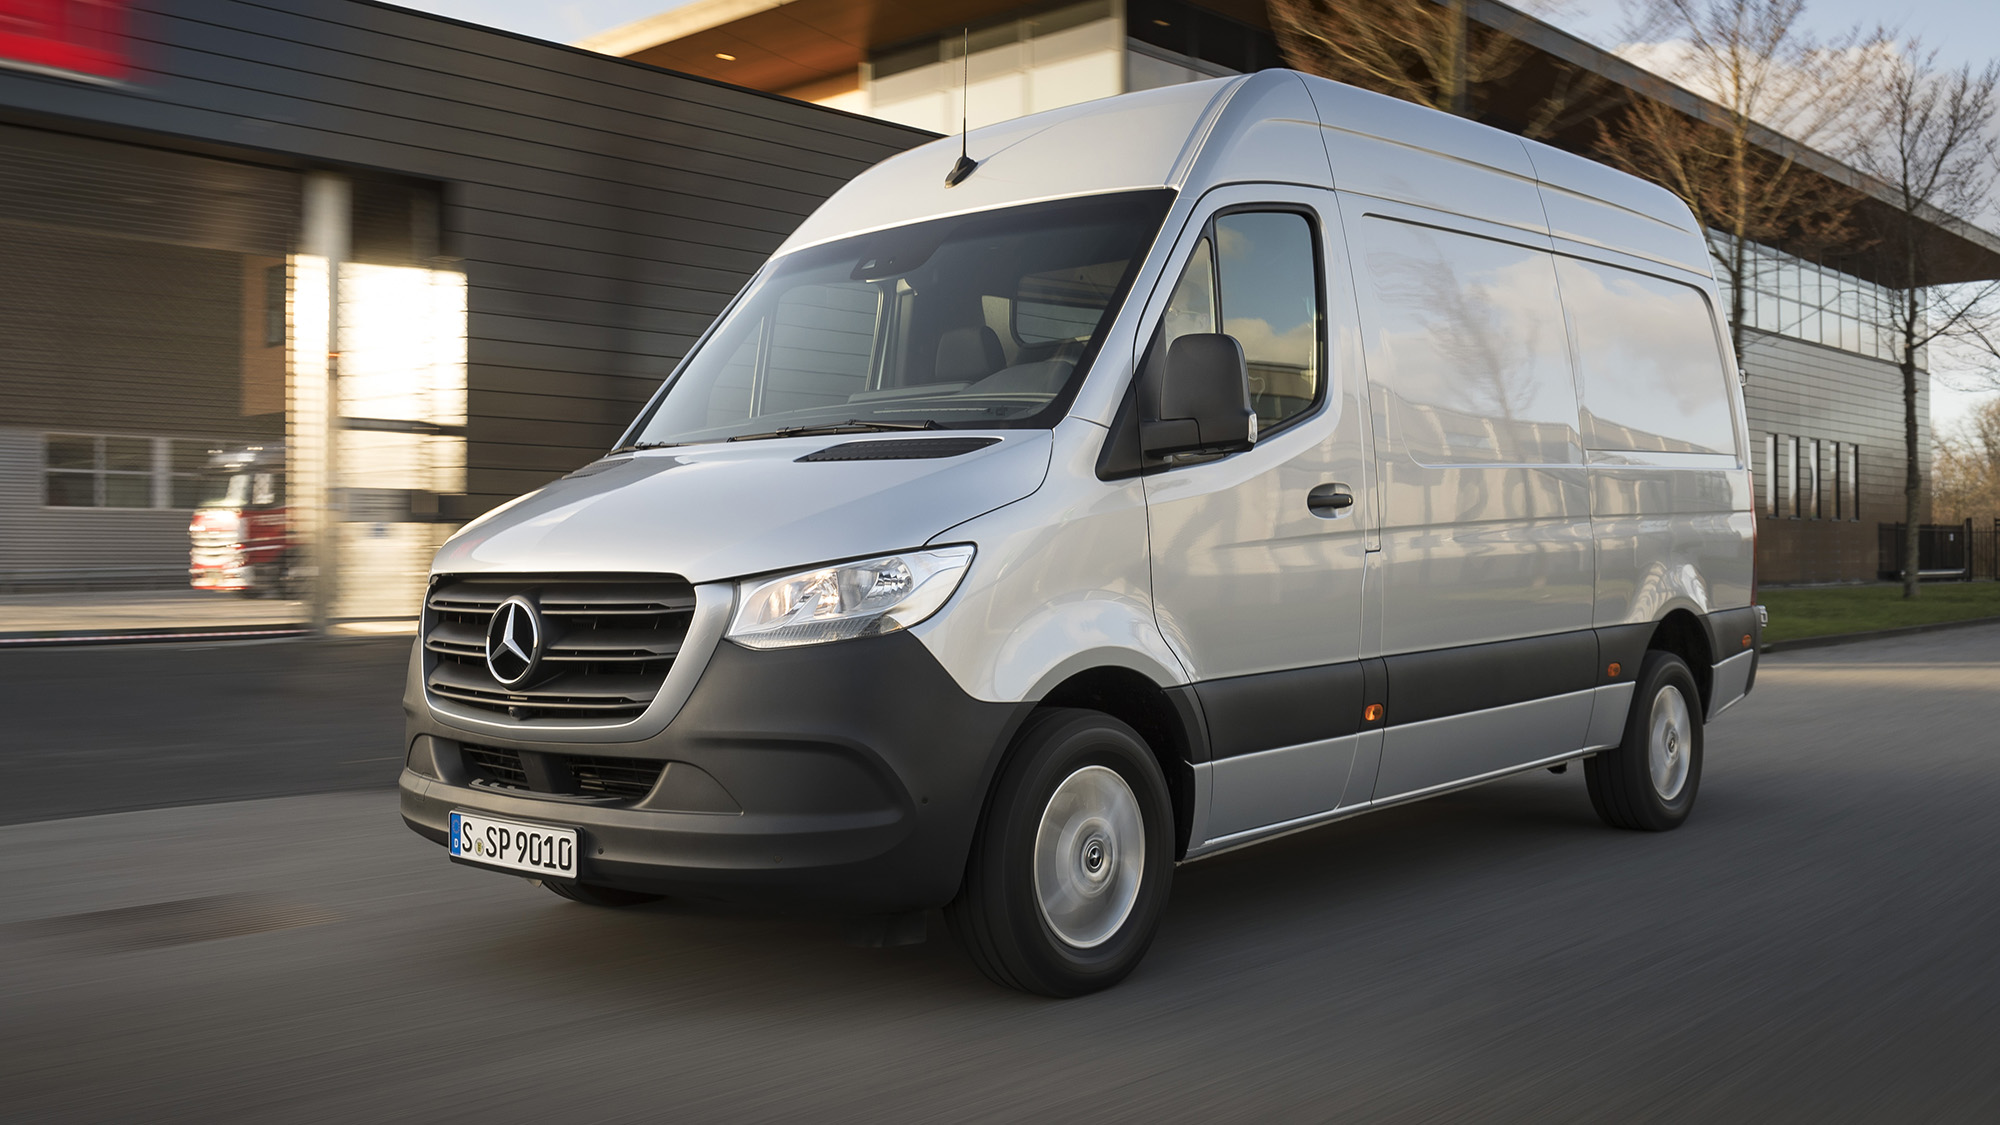 Mercedes-Benz Sprinter pricing and 